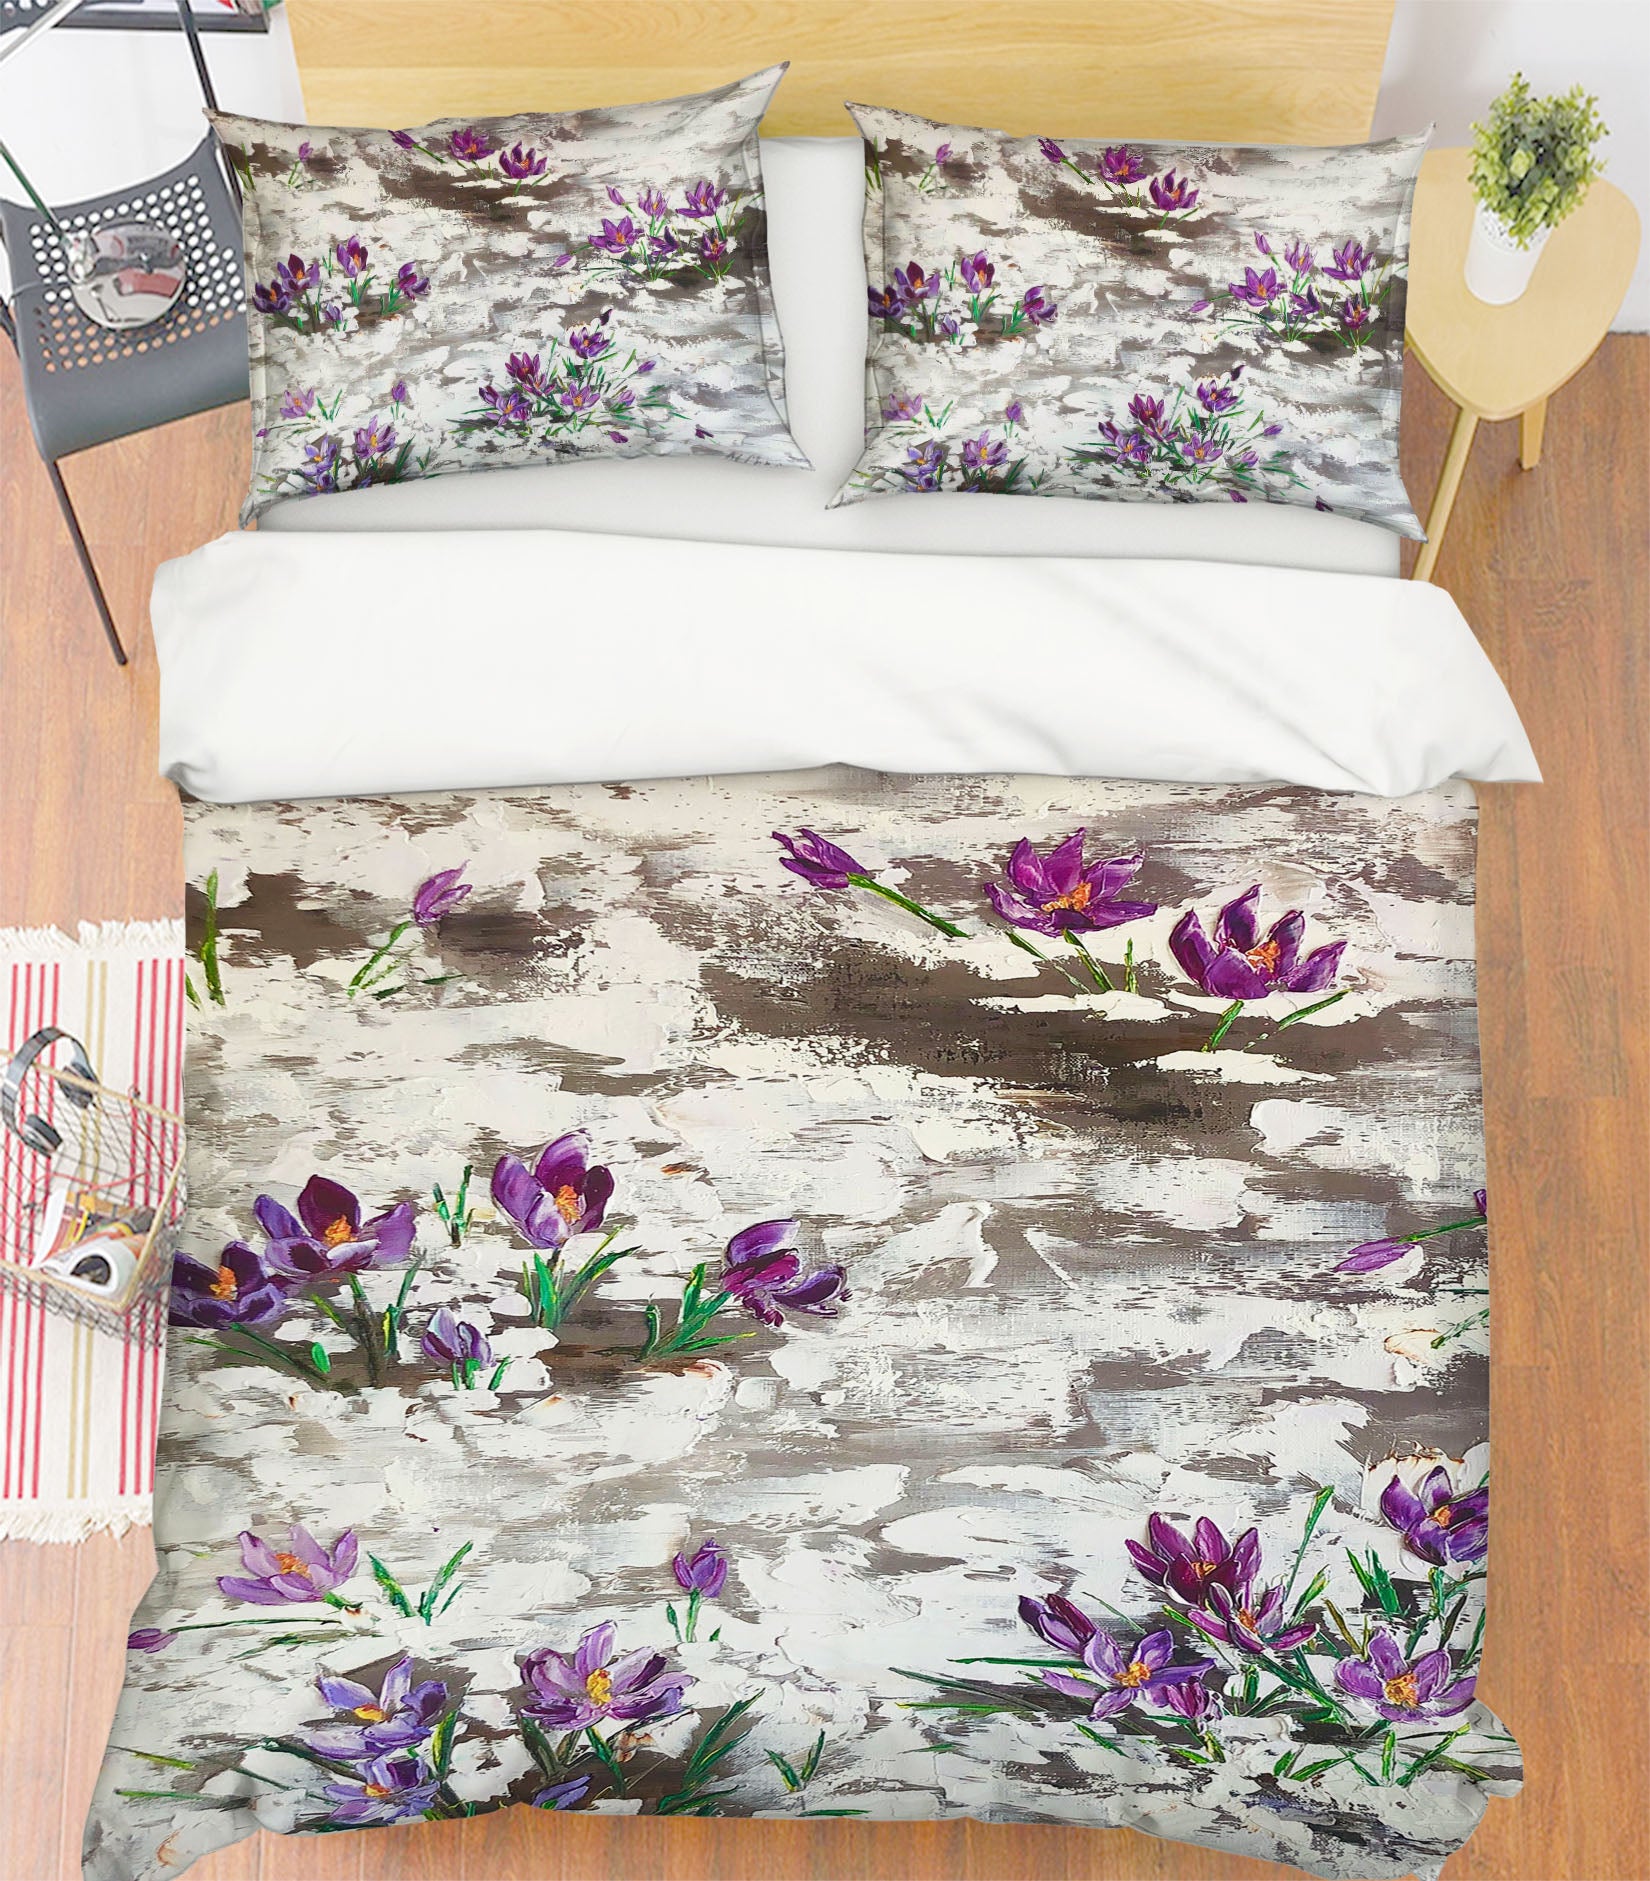 3D Purple Painted Flowers 523 Skromova Marina Bedding Bed Pillowcases Quilt